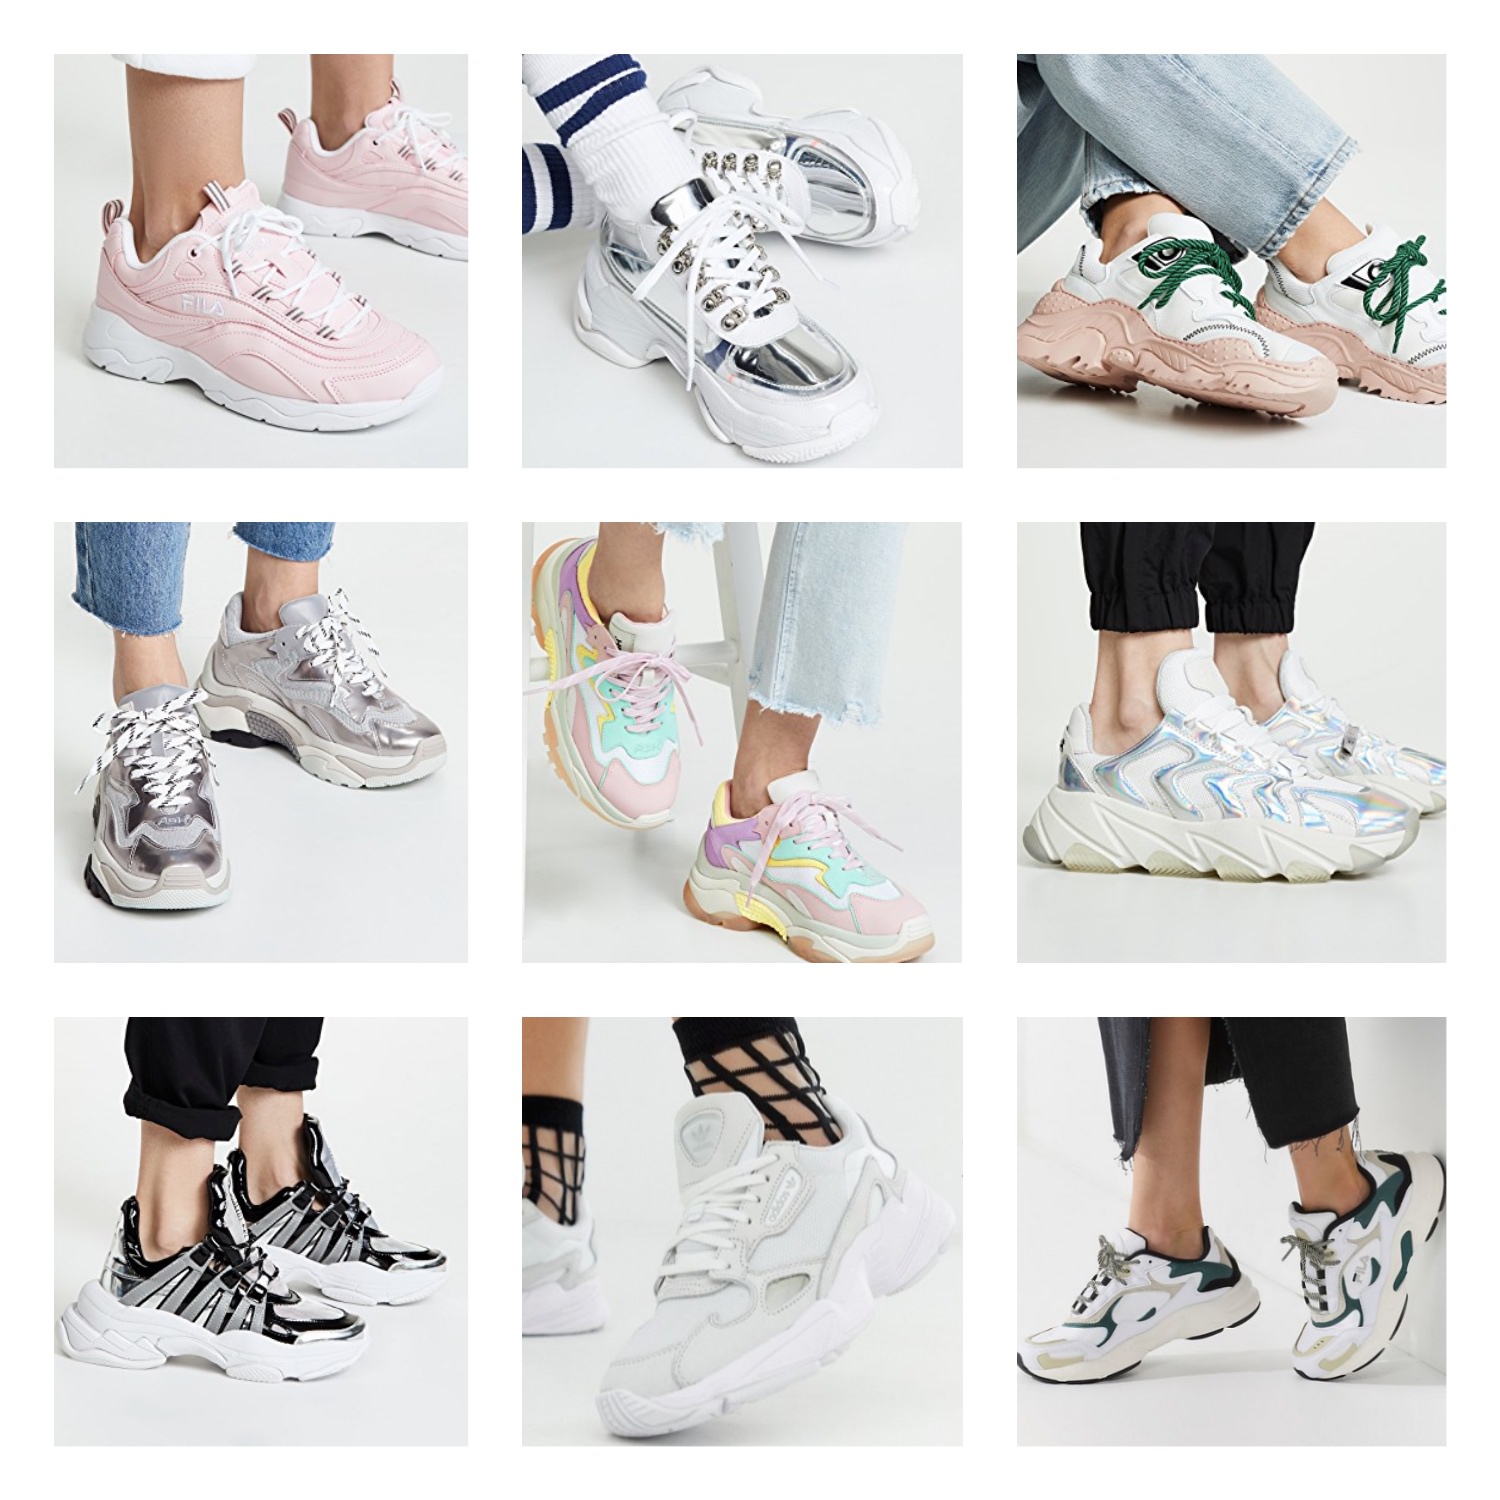 Dad Sneaks - Our New Favorite Trend! - The Mom Edit